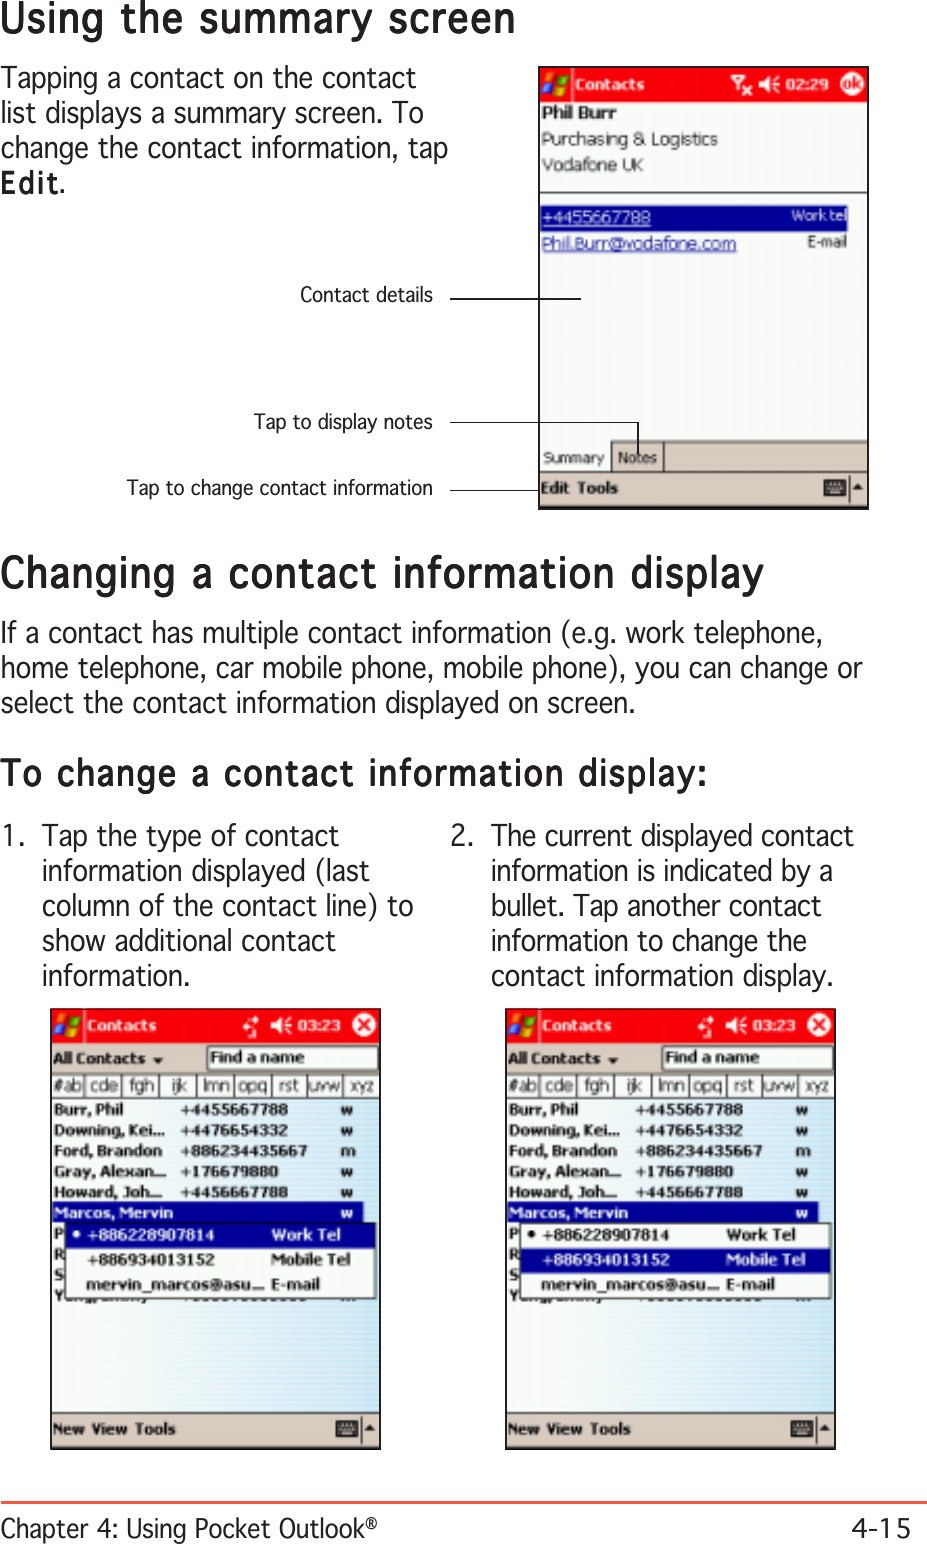 Chapter 4: Using Pocket Outlook®4-15Using the summary screenUsing the summary screenUsing the summary screenUsing the summary screenUsing the summary screenTapping a contact on the contactlist displays a summary screen. Tochange the contact information, tapEditEditEditEditEdit.Contact detailsTap to display notesTap to change contact informationChanging a contact information displayChanging a contact information displayChanging a contact information displayChanging a contact information displayChanging a contact information displayIf a contact has multiple contact information (e.g. work telephone,home telephone, car mobile phone, mobile phone), you can change orselect the contact information displayed on screen.To change a contact information display:To change a contact information display:To change a contact information display:To change a contact information display:To change a contact information display:1. Tap the type of contactinformation displayed (lastcolumn of the contact line) toshow additional contactinformation.2. The current displayed contactinformation is indicated by abullet. Tap another contactinformation to change thecontact information display.